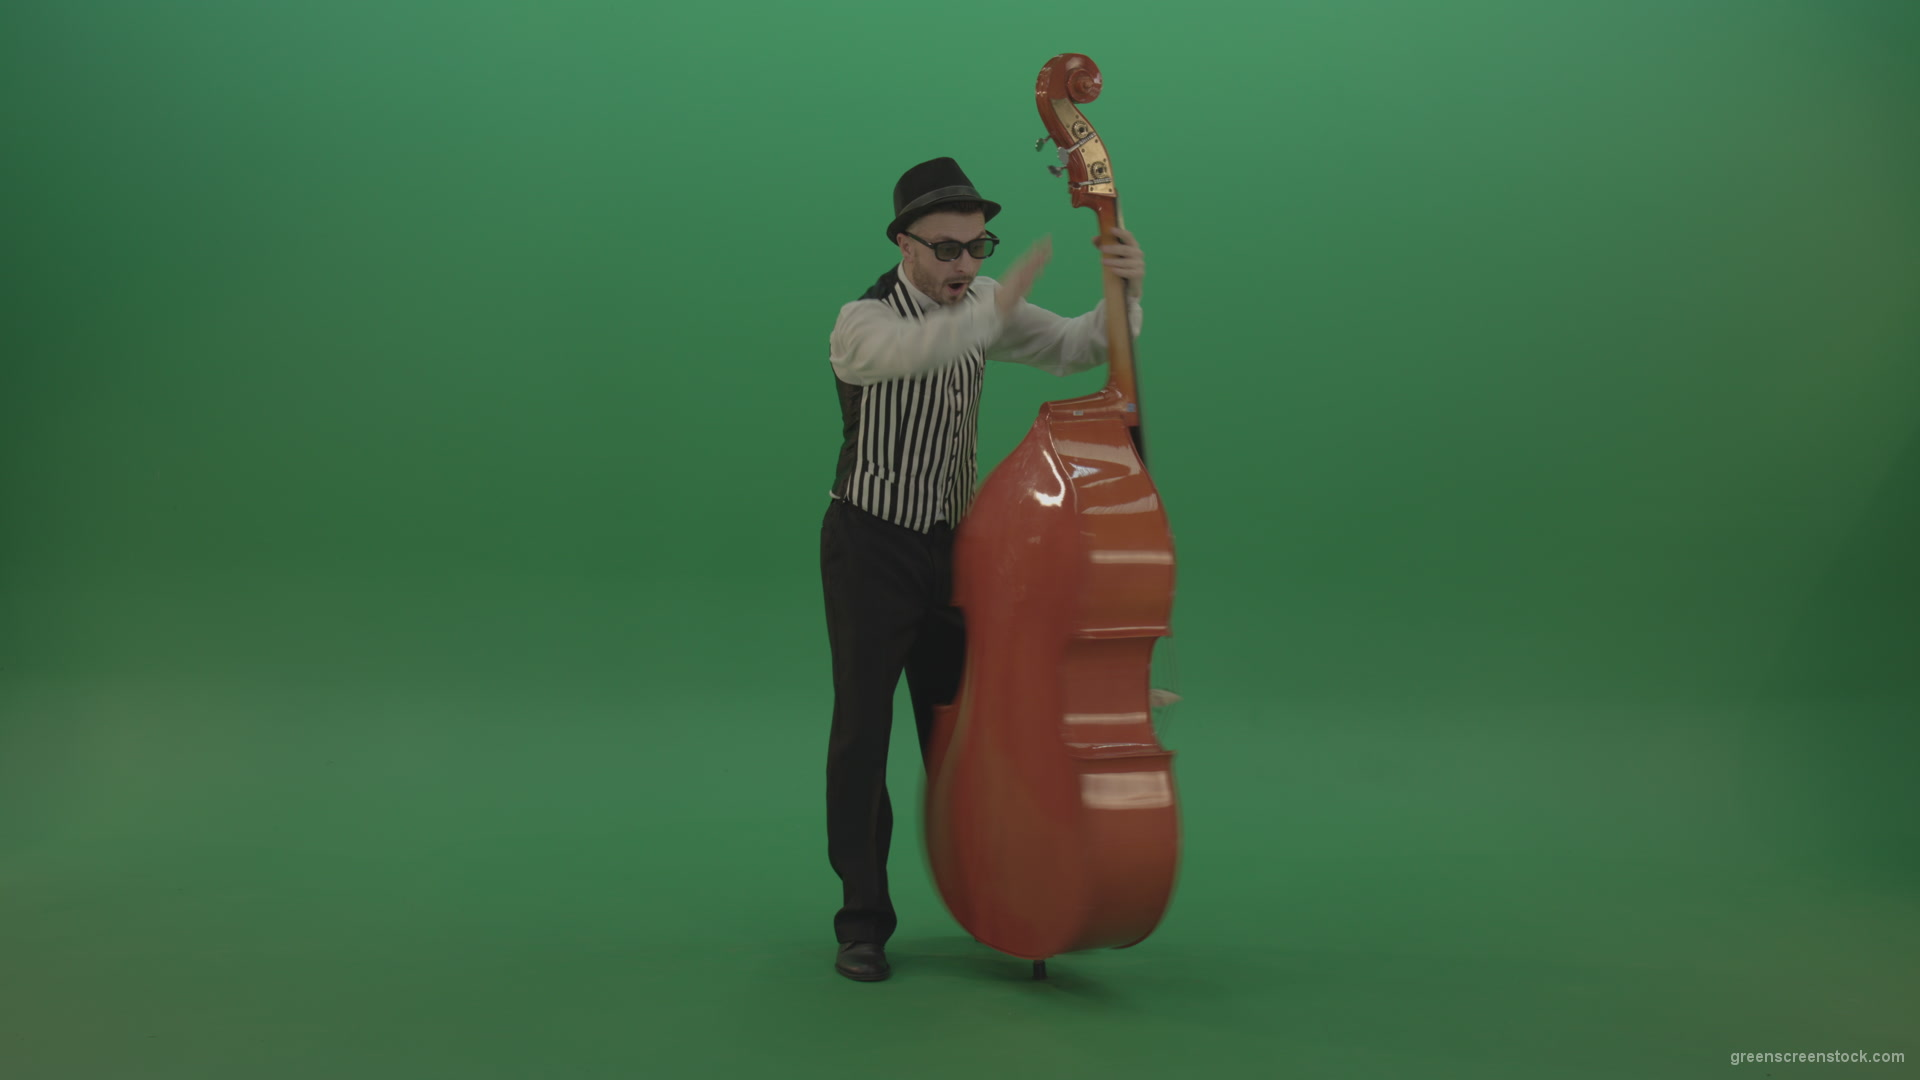 Full-size-man-play-jazz-on-double-bass-String-music-instrument-isolated-on-green-screen_006 Green Screen Stock